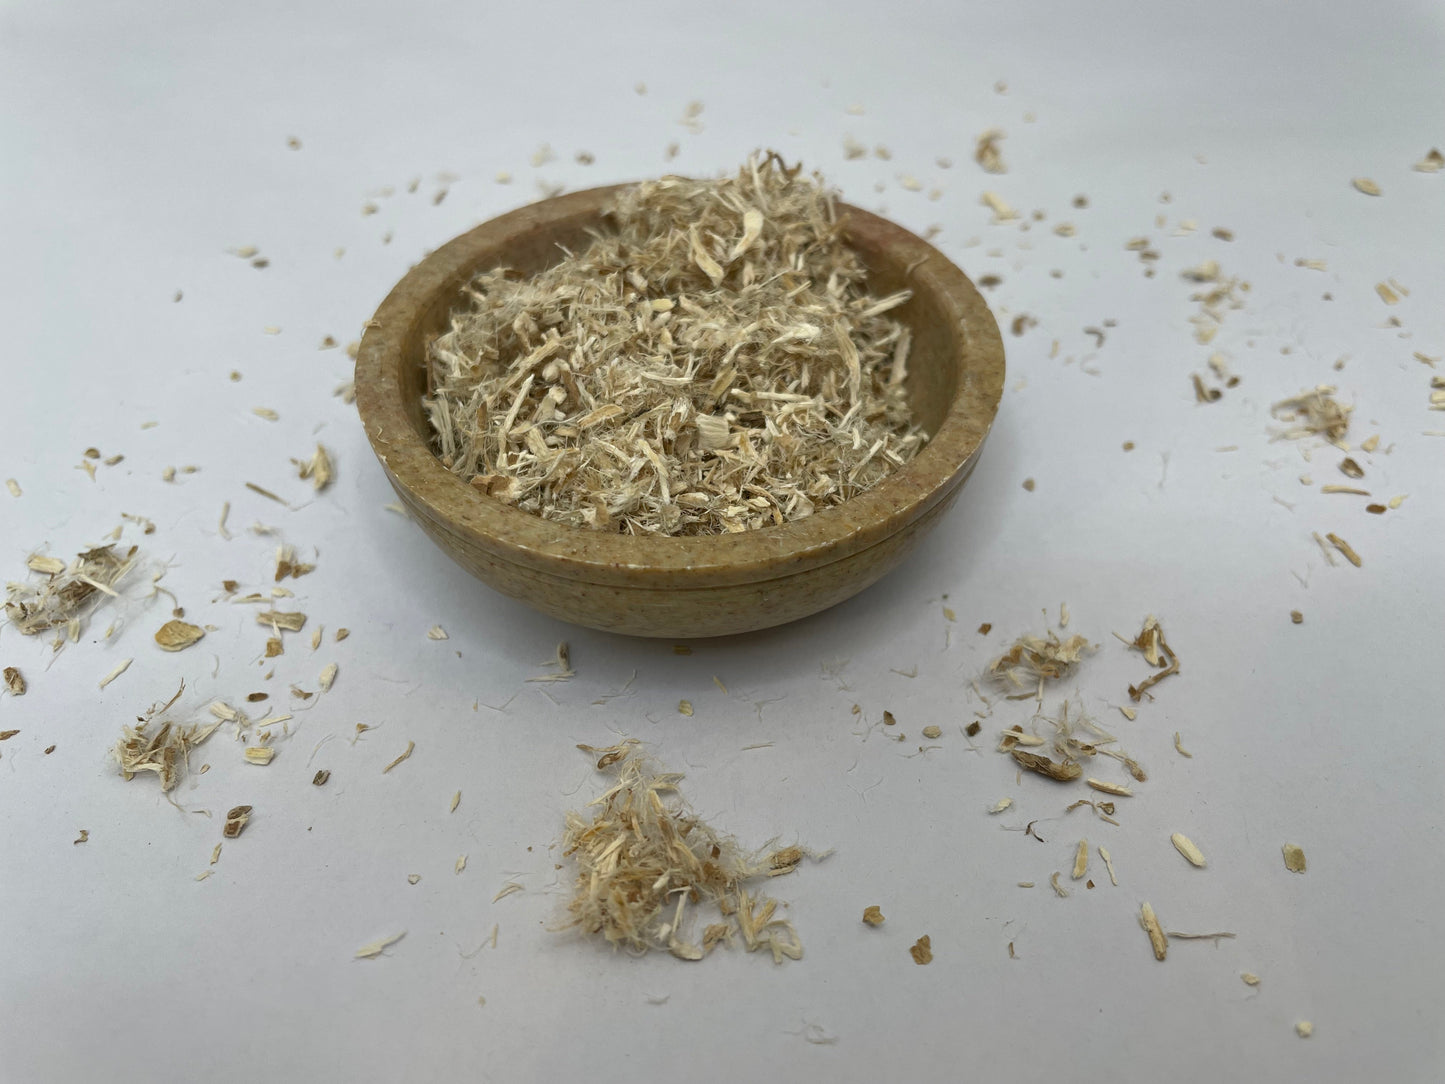 Marshmallow Cut Herb - Althea officinalis (root)